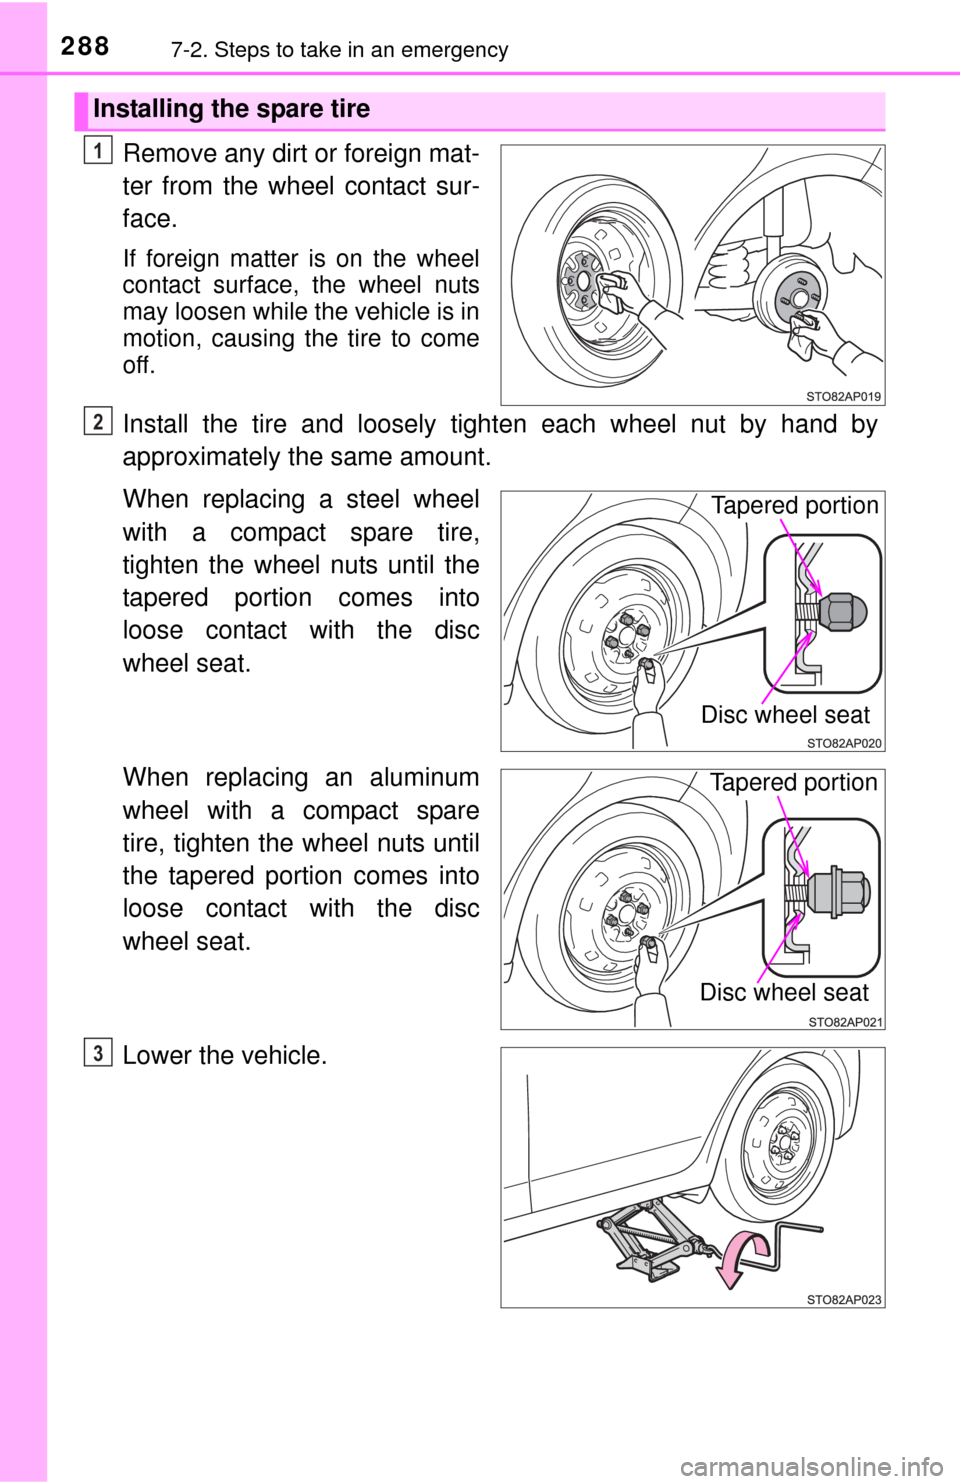 TOYOTA YARIS 2015 3.G Owners Manual 2887-2. Steps to take in an emergency
Remove any dirt or foreign mat-
ter from the wheel contact sur-
face.
If foreign matter is on the wheel
contact surface, the wheel nuts
may loosen while the vehic